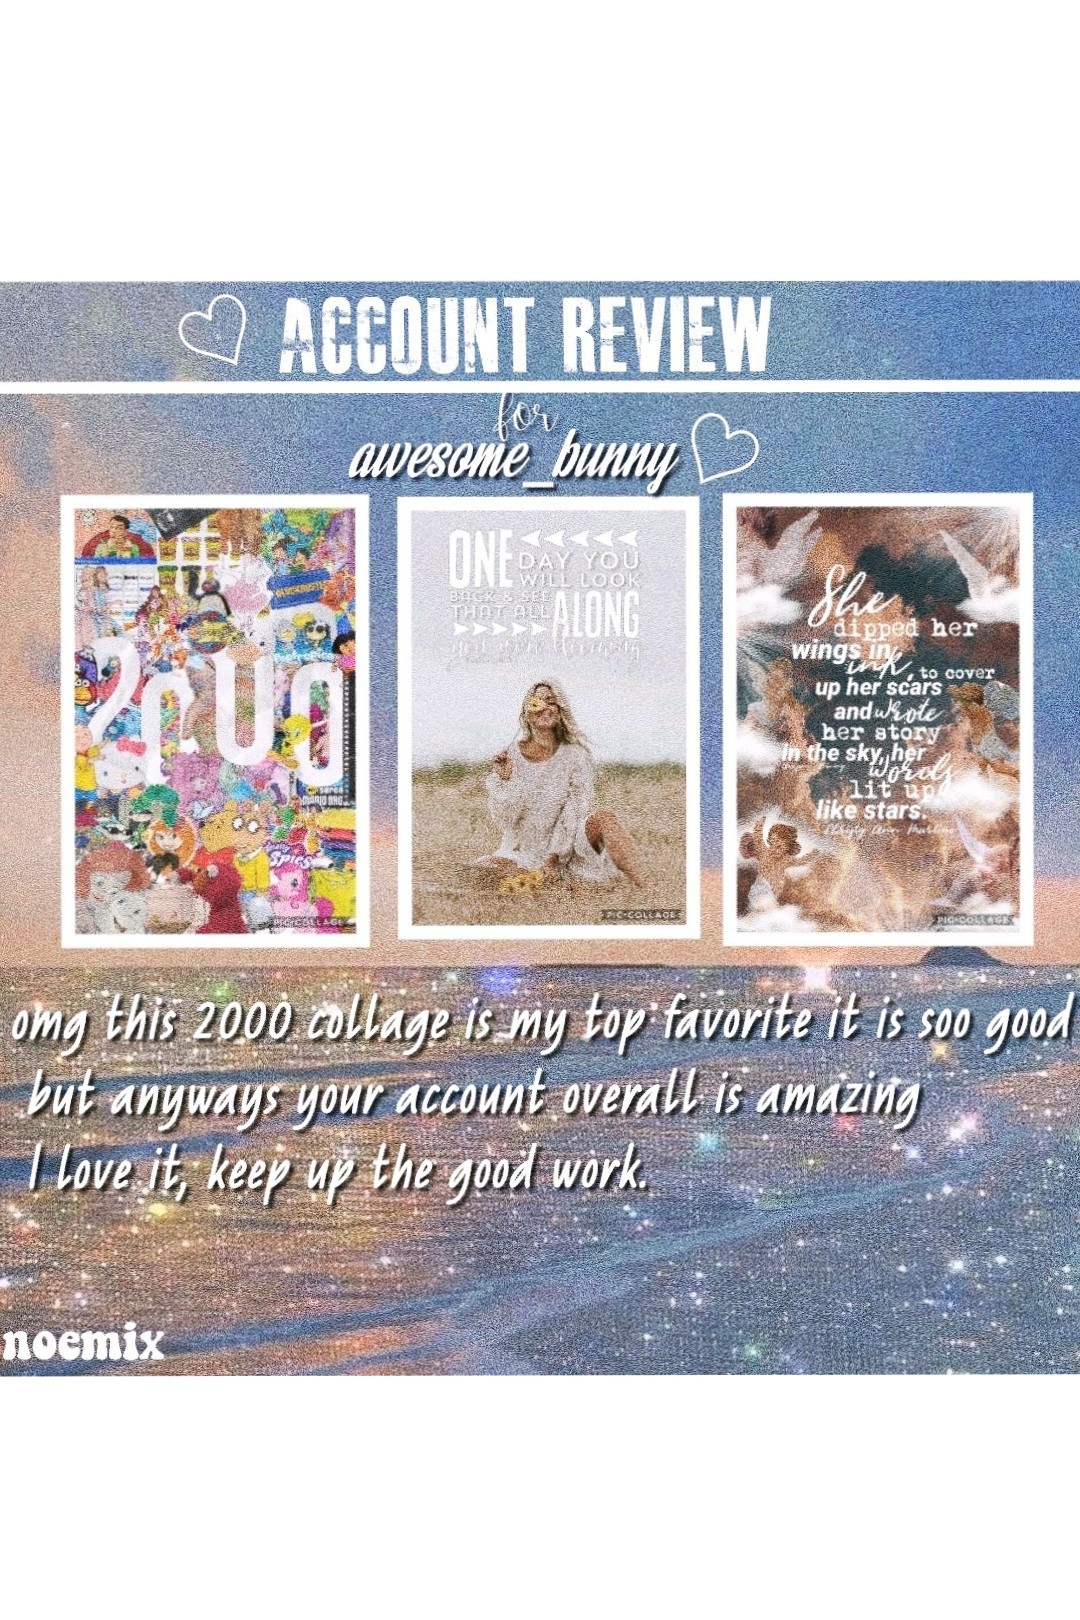 account review #2 

sorry these are taking so long